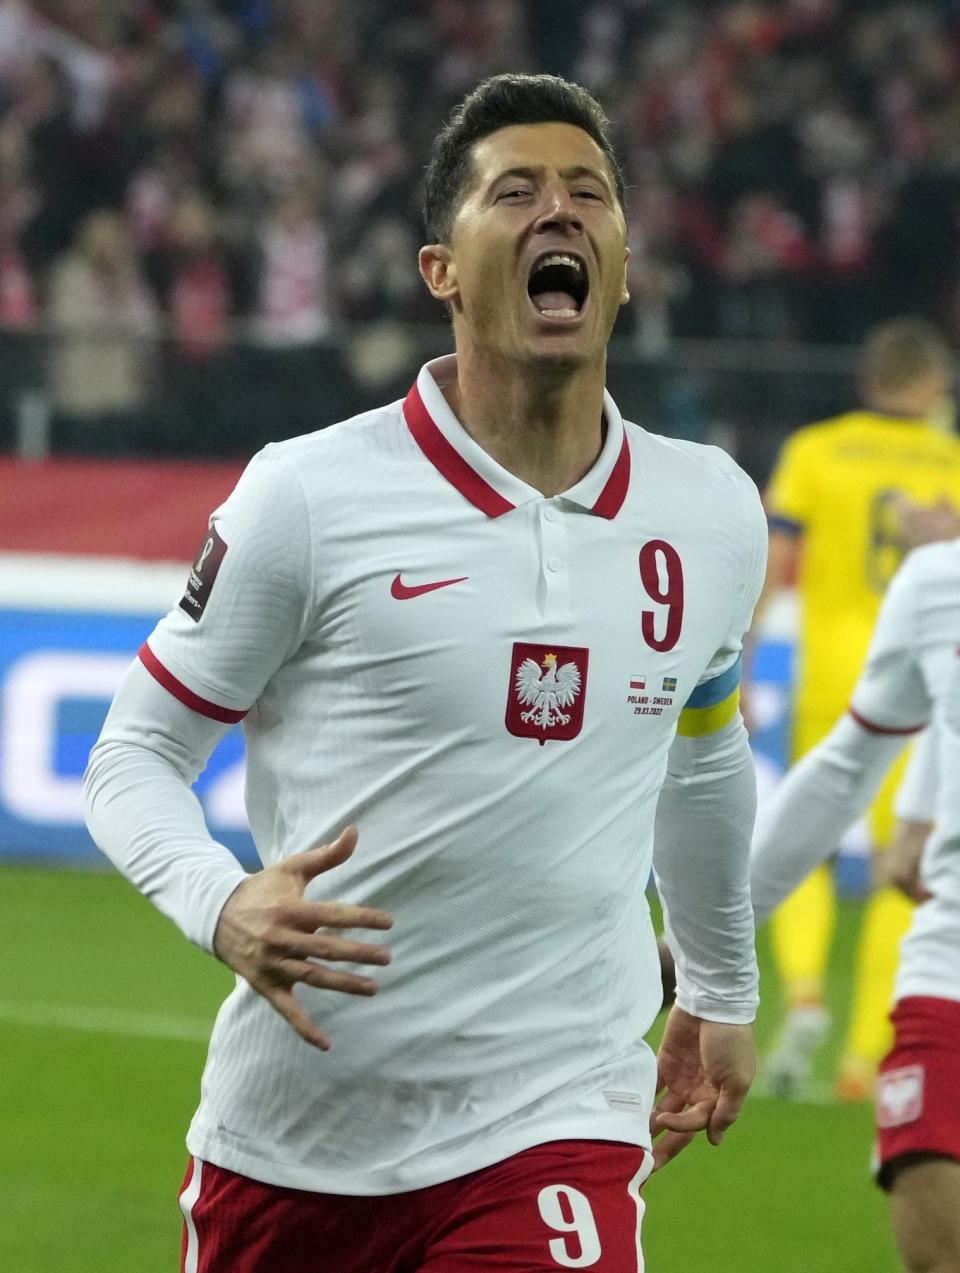 Poland's Robert Lewandowski celebrates after scoring the opening goal of his team during the World Cup 2022 playoff soccer match between Poland and Sweden at Silesian Stadium, in Chorzow, southern Poland, Tuesday, March 29, 2022. (AP Photo/Czarek Sokolowski)